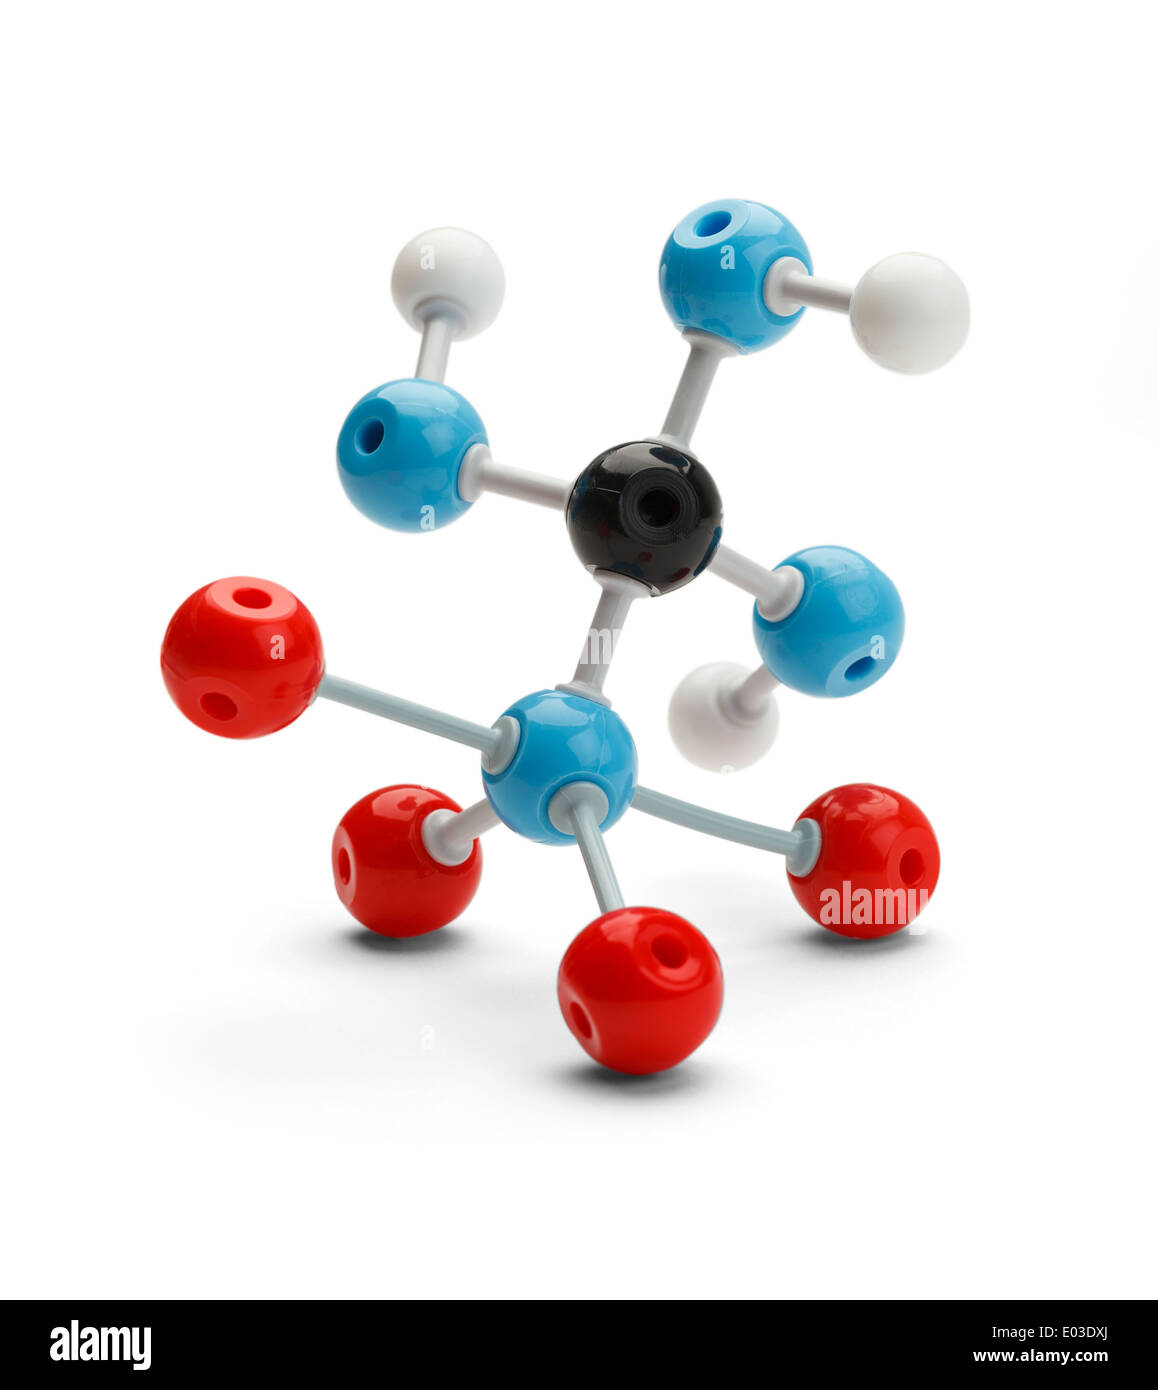 Molecule structure Isolated on a White Background. Stock Photo